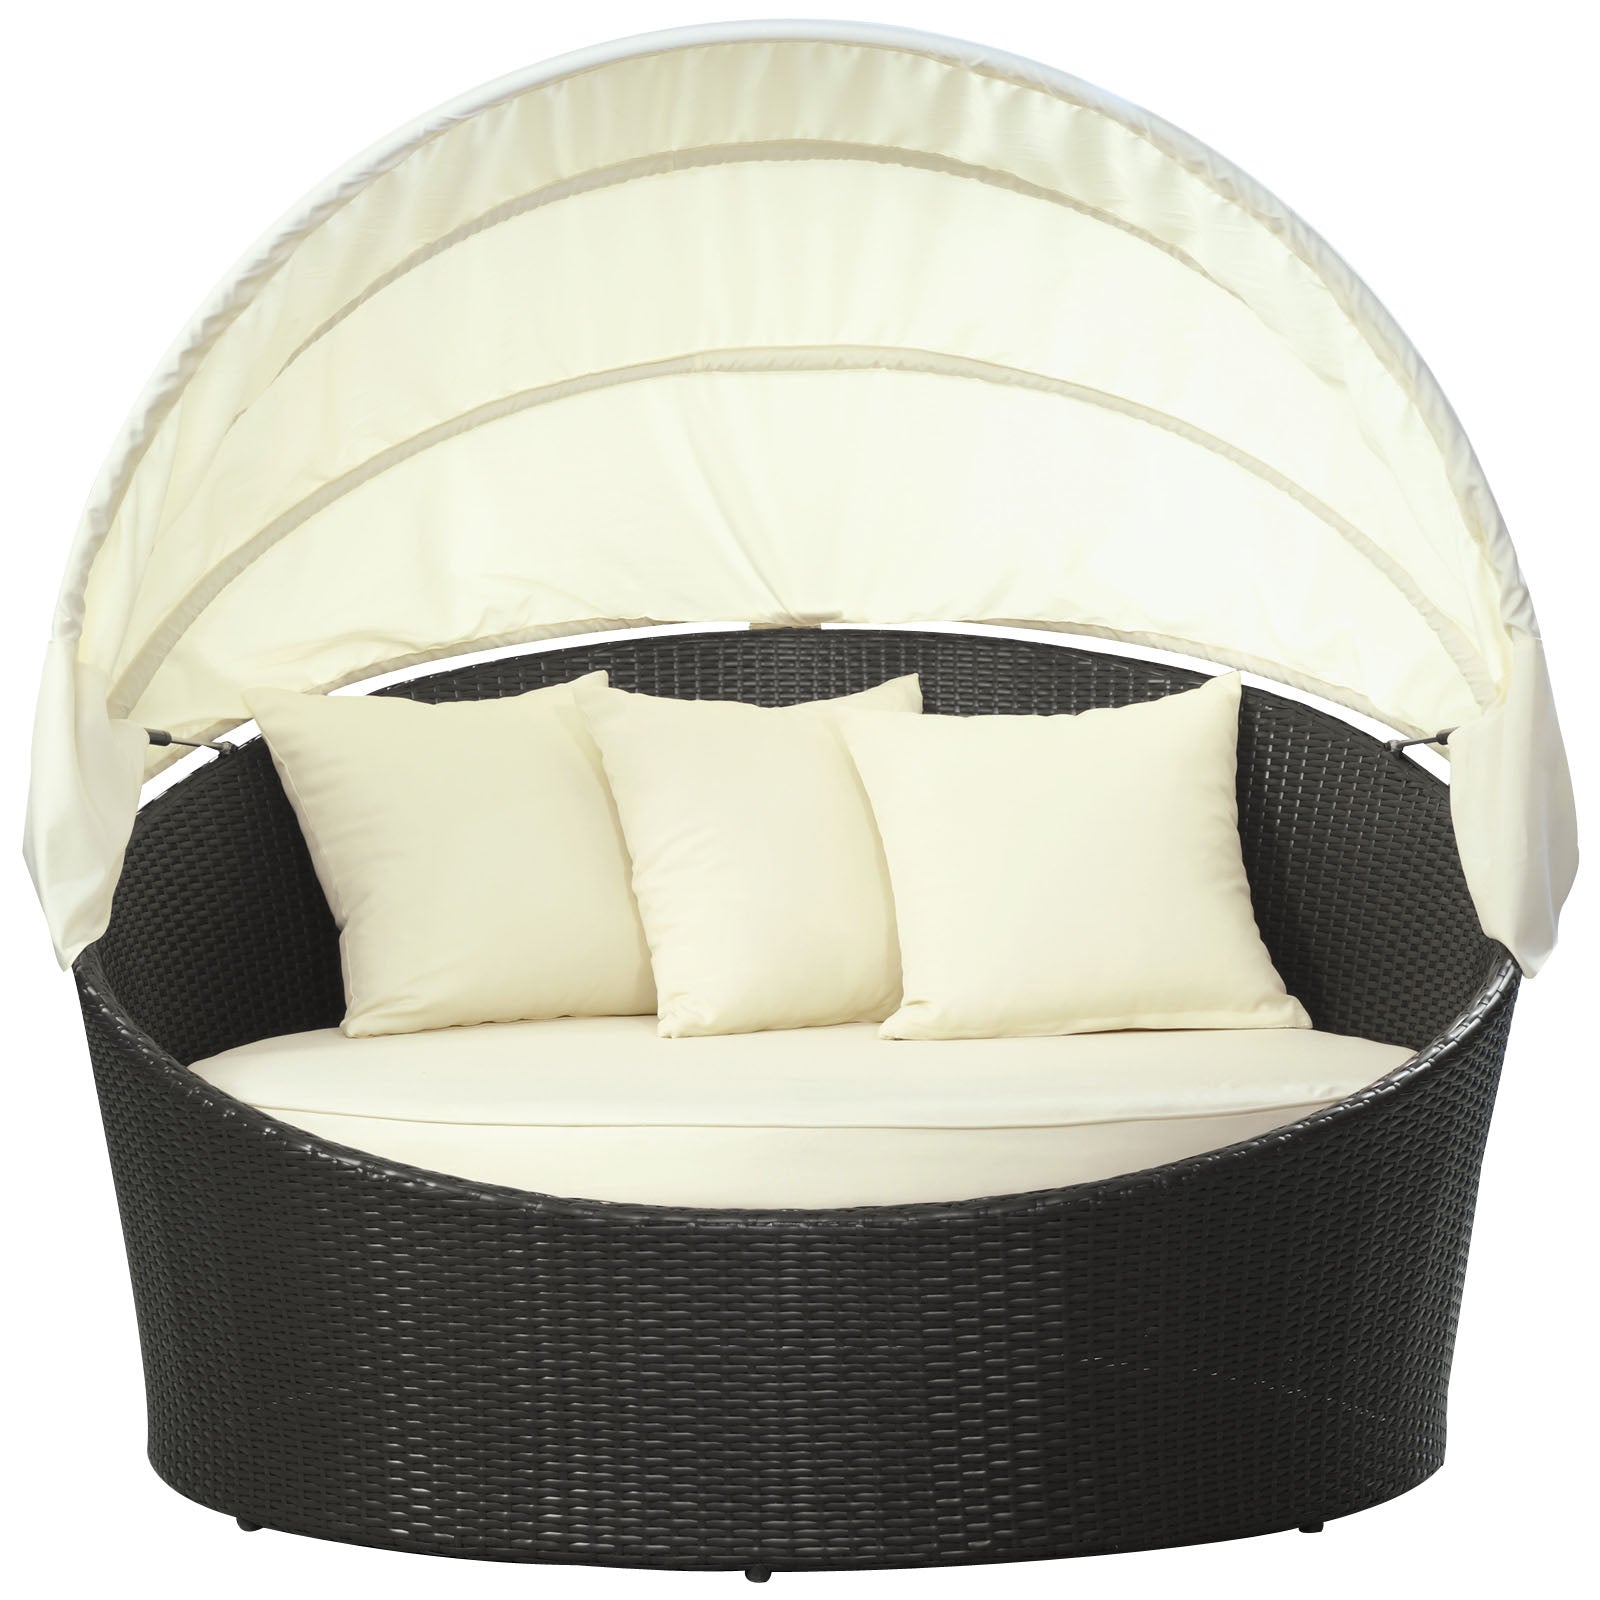 Siesta Canopy Outdoor Patio Daybed